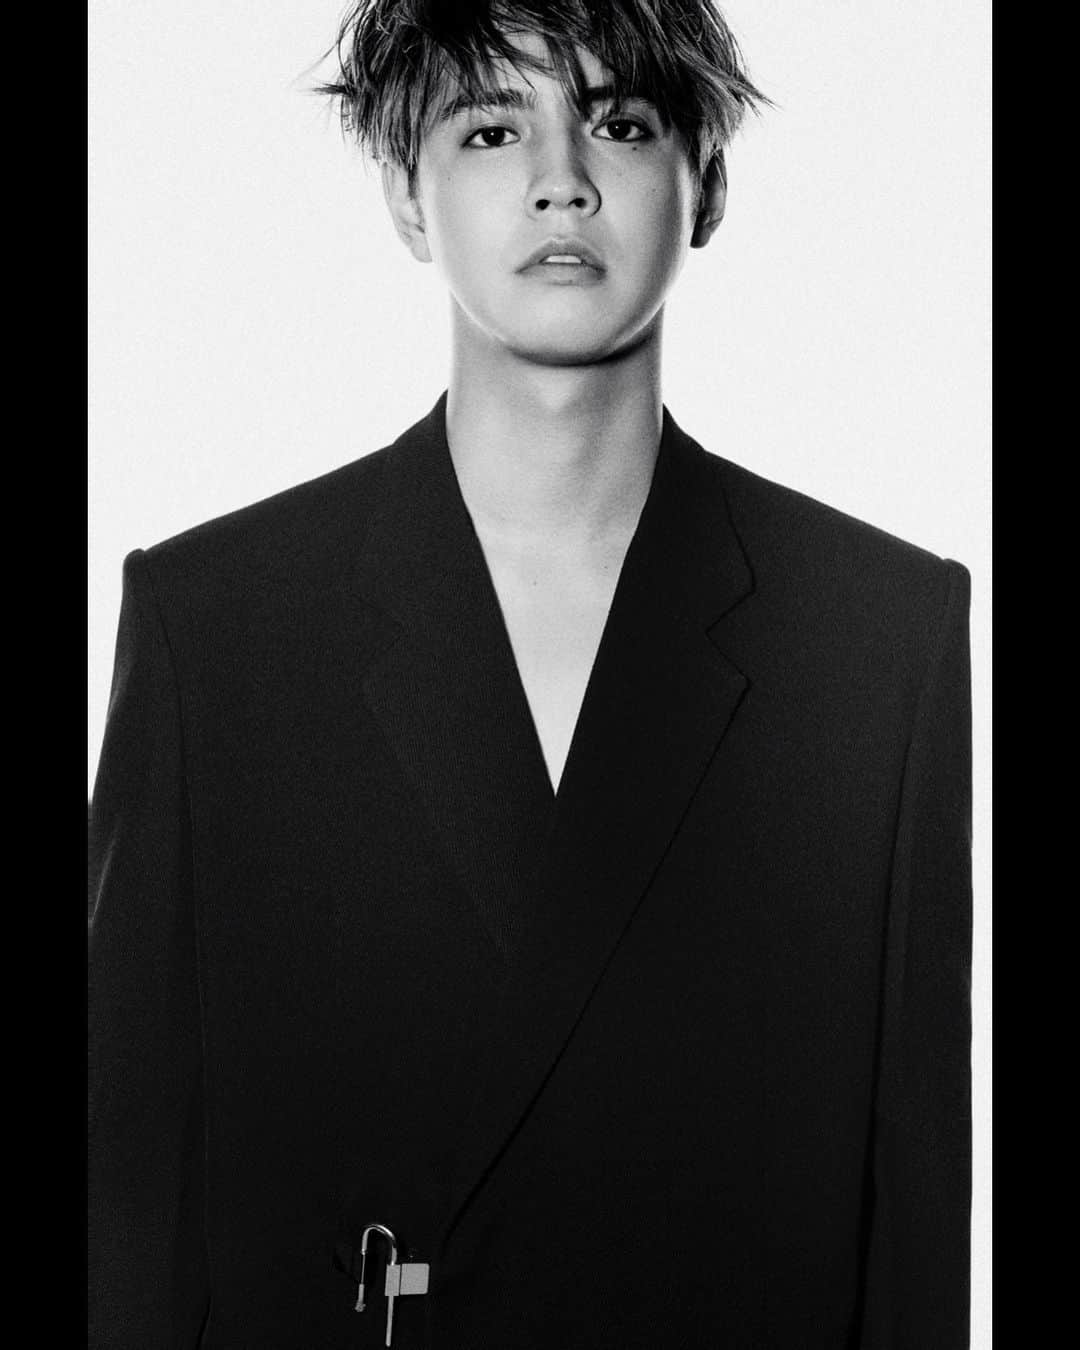 片寄涼太のインスタグラム：「I am very honored to have been chosen as the ambassador of Givenchy in Japan. I know that Givenchy has a long history in the fashion industry.  I am very happy that I was chosen at this time when they announced that Matthew M. Williams has become the new Creative Director.  With respect that Givenchy has a long history in making beautiful high-end clothing, I want to do what I can to promote the brand through my position in the entertainment industry of Japan. I am looking forward to seeing how Matthew will incorporate his ideas and design them into Givenchy’s traditional style.  @givenchyofficial  @matthewmwilliams  #Givenchy #givenchyfamily  ------------------ Givenchyの初の日本人アンバサダーとして選んでいただき、とても光栄に思っています。 Givenchyはファッション業界のなかで、とても長い歴史があると思います。 クリエイティブディレクターがMatthew•M•Williams氏に代わる、ブランドがまた生まれ変わるタイミングでのアンバサダーのお話にも大変ありがたく思っています。 Givenchyが長い歴史のなかで最高級の洋服をつくり続けてきたことに尊敬の意を込めて、日本のエンターテイメント業界で僕なりの立場でGivenchyというブランドを広めていきたいと思います。 Givenchyの由緒あるスタイルに、Matthewが彼自身のアイデアやデザインをどうやって融合させるかをとても楽しみにしています。」